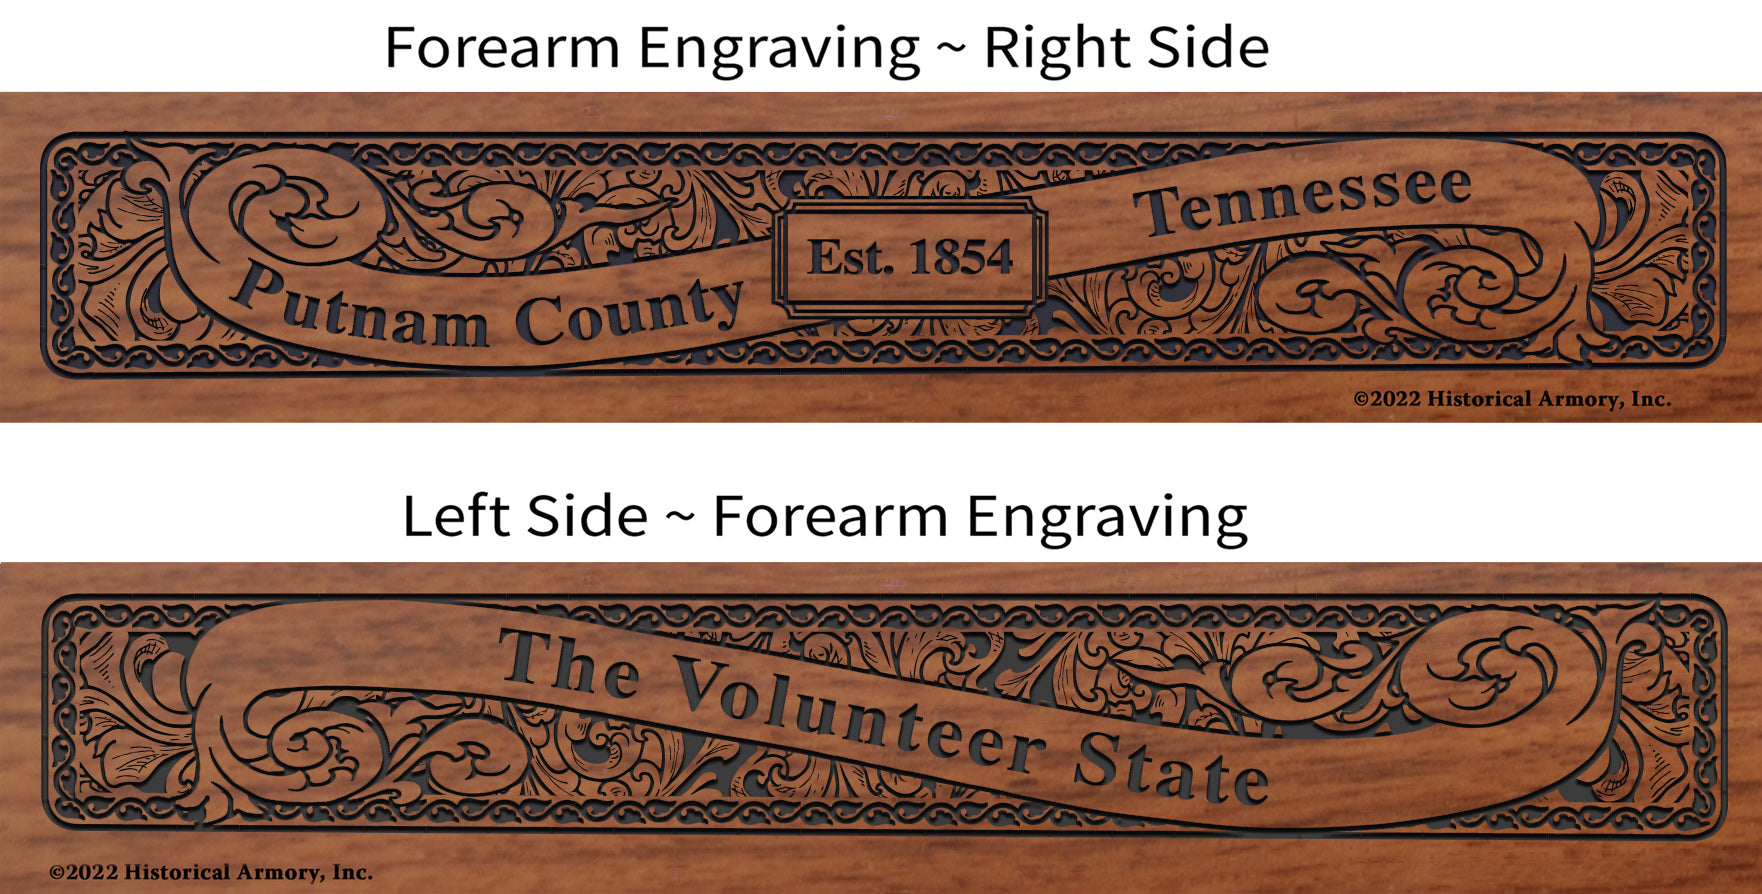 Putnam County Tennessee Engraved Rifle Forearm